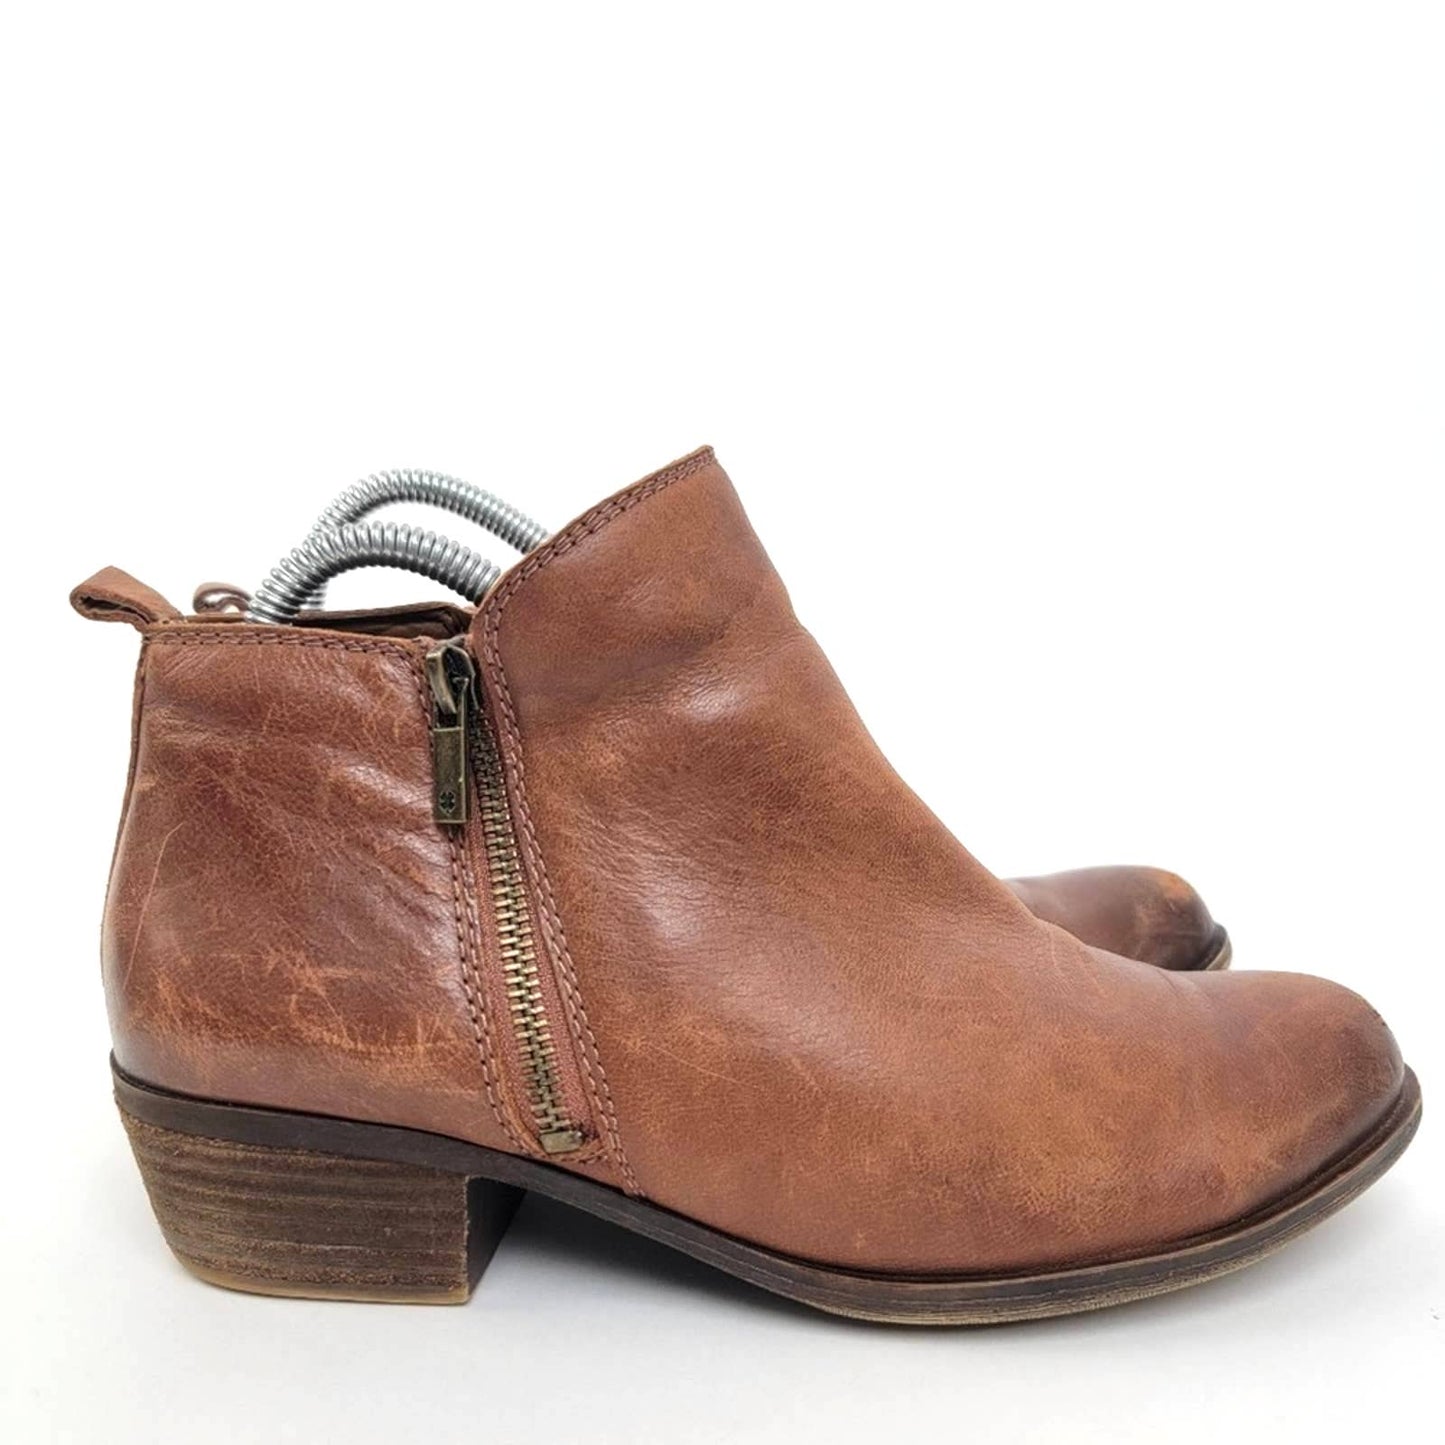 Lucky Brand Basel Bootie - Toffee - 9